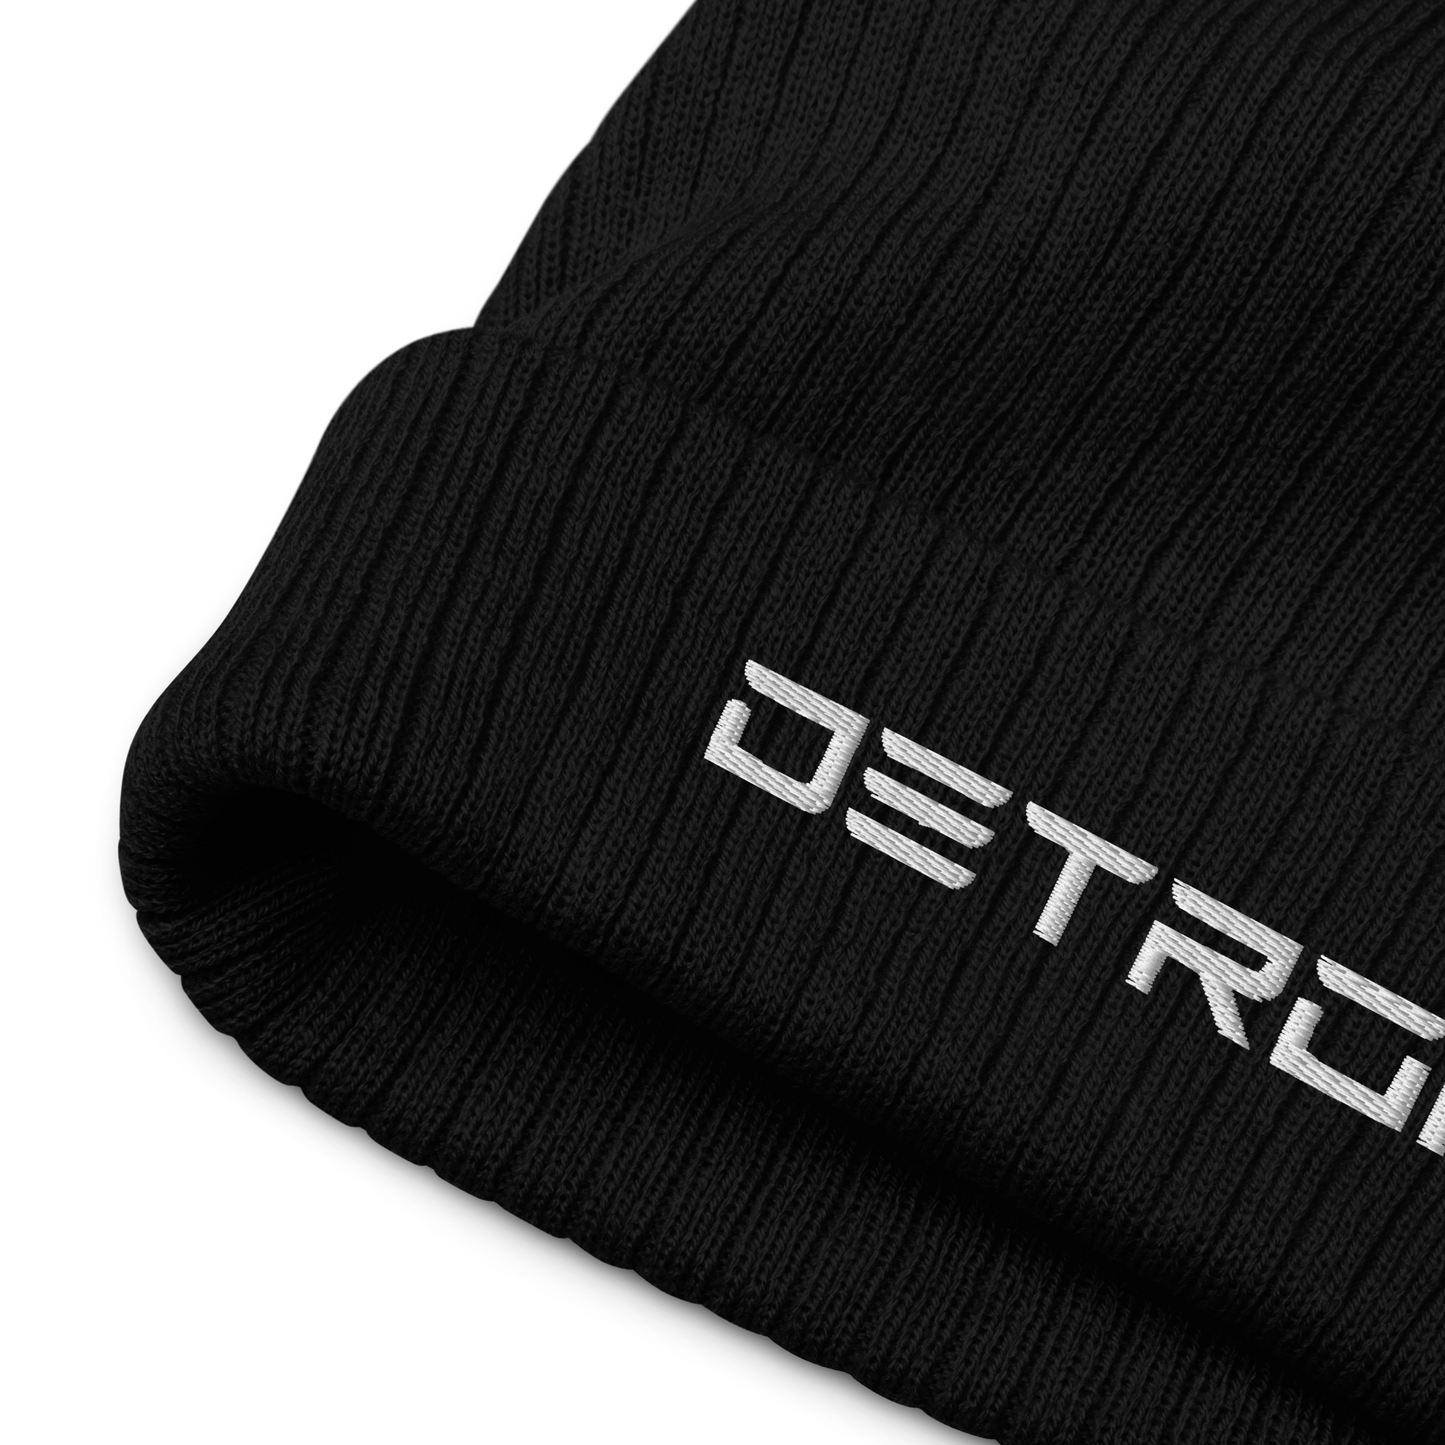 'Detroit' Ribbed Beanie (Electric Font)